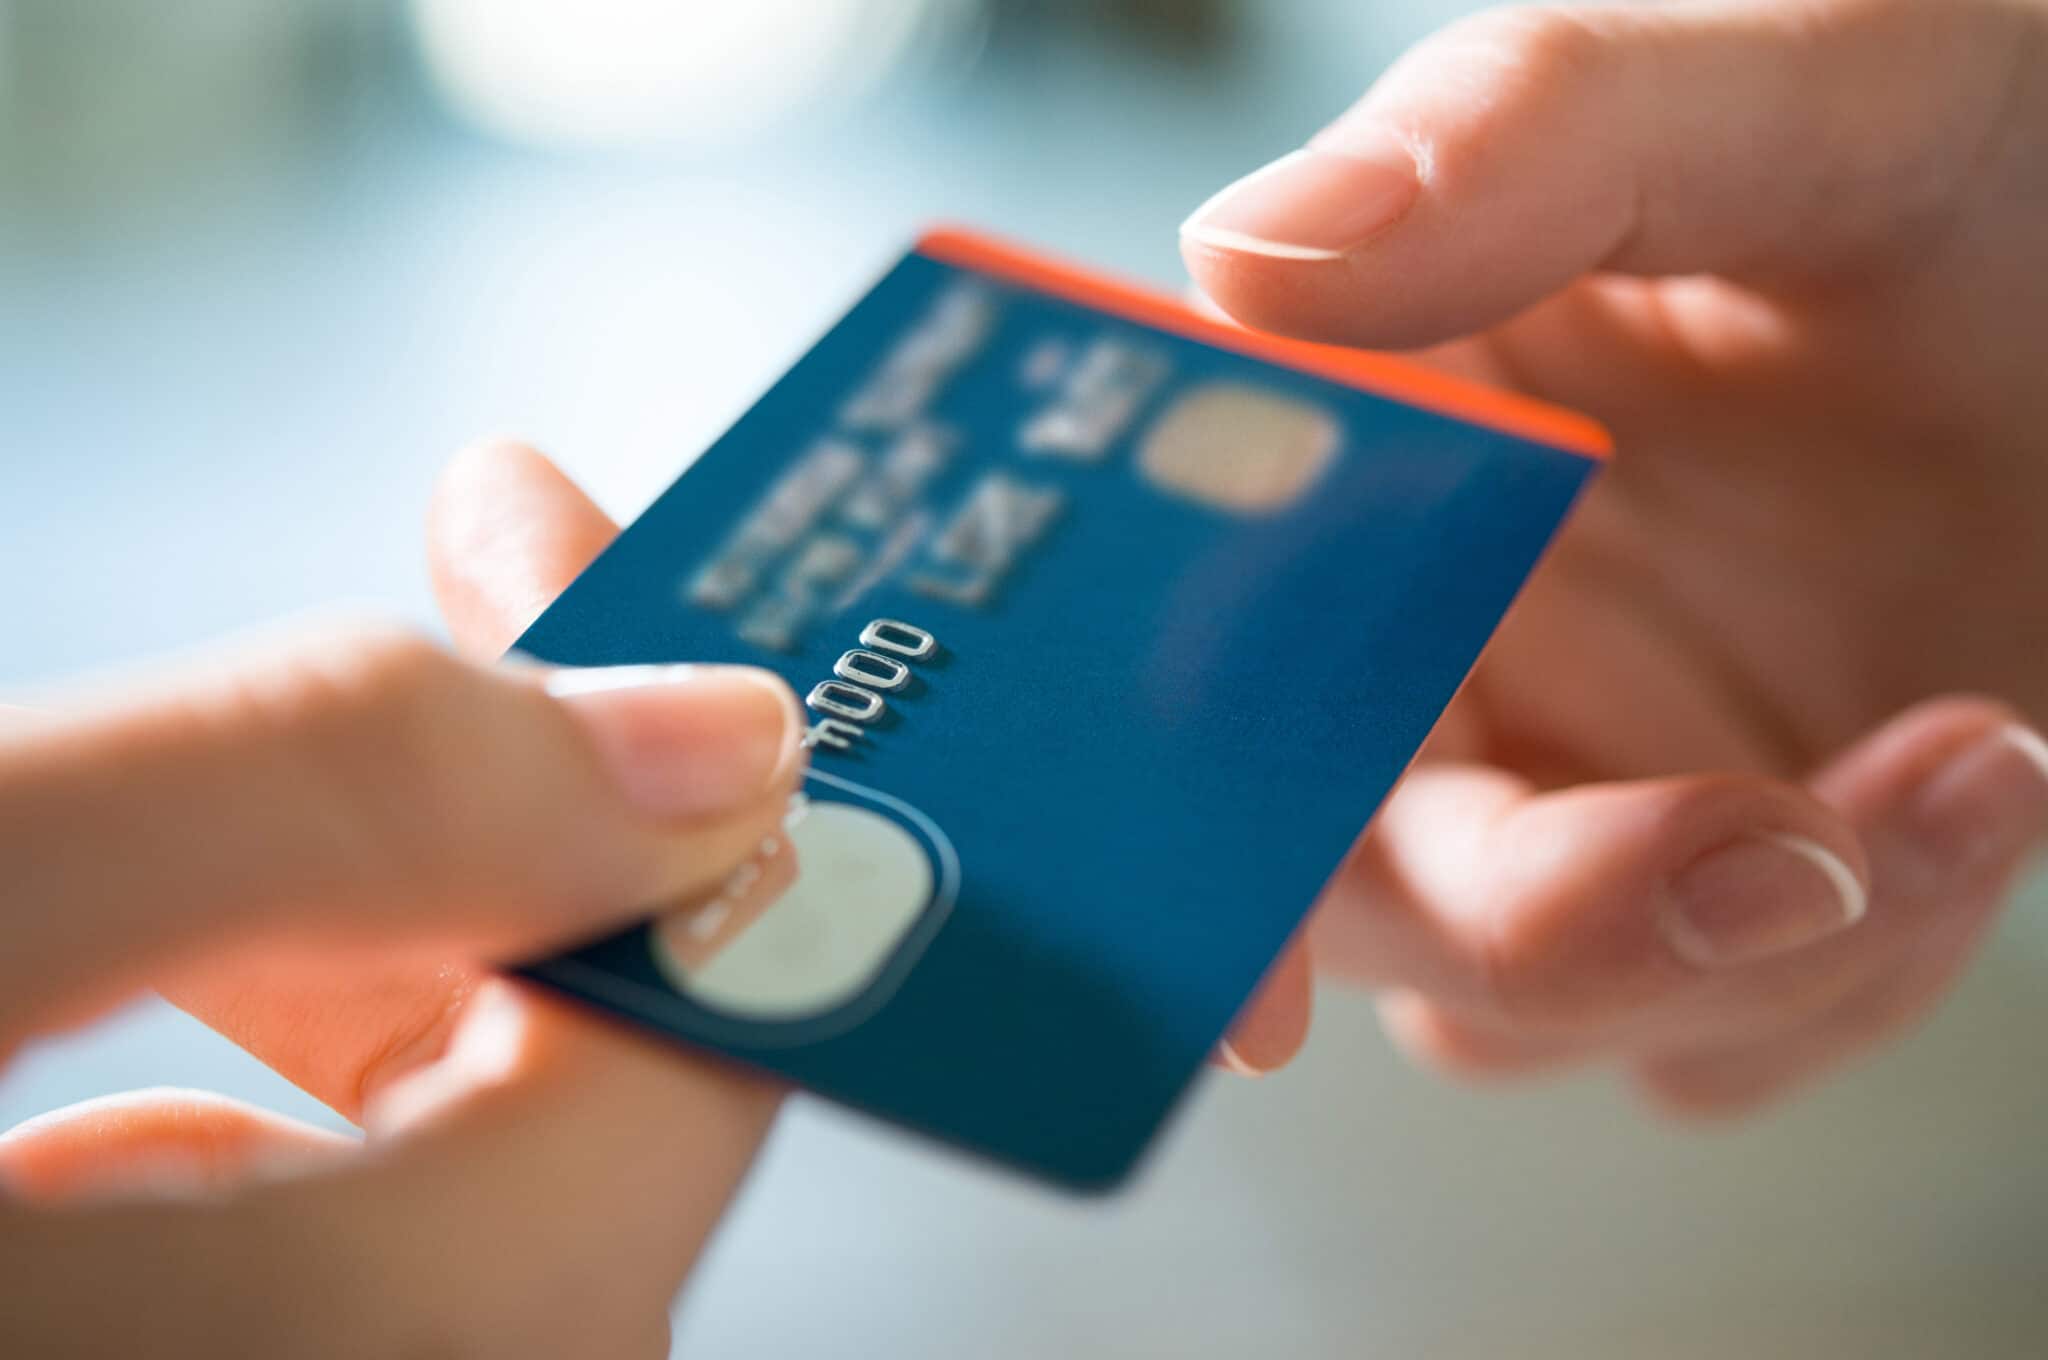 Roswell may start charging transaction fees for credit card payments